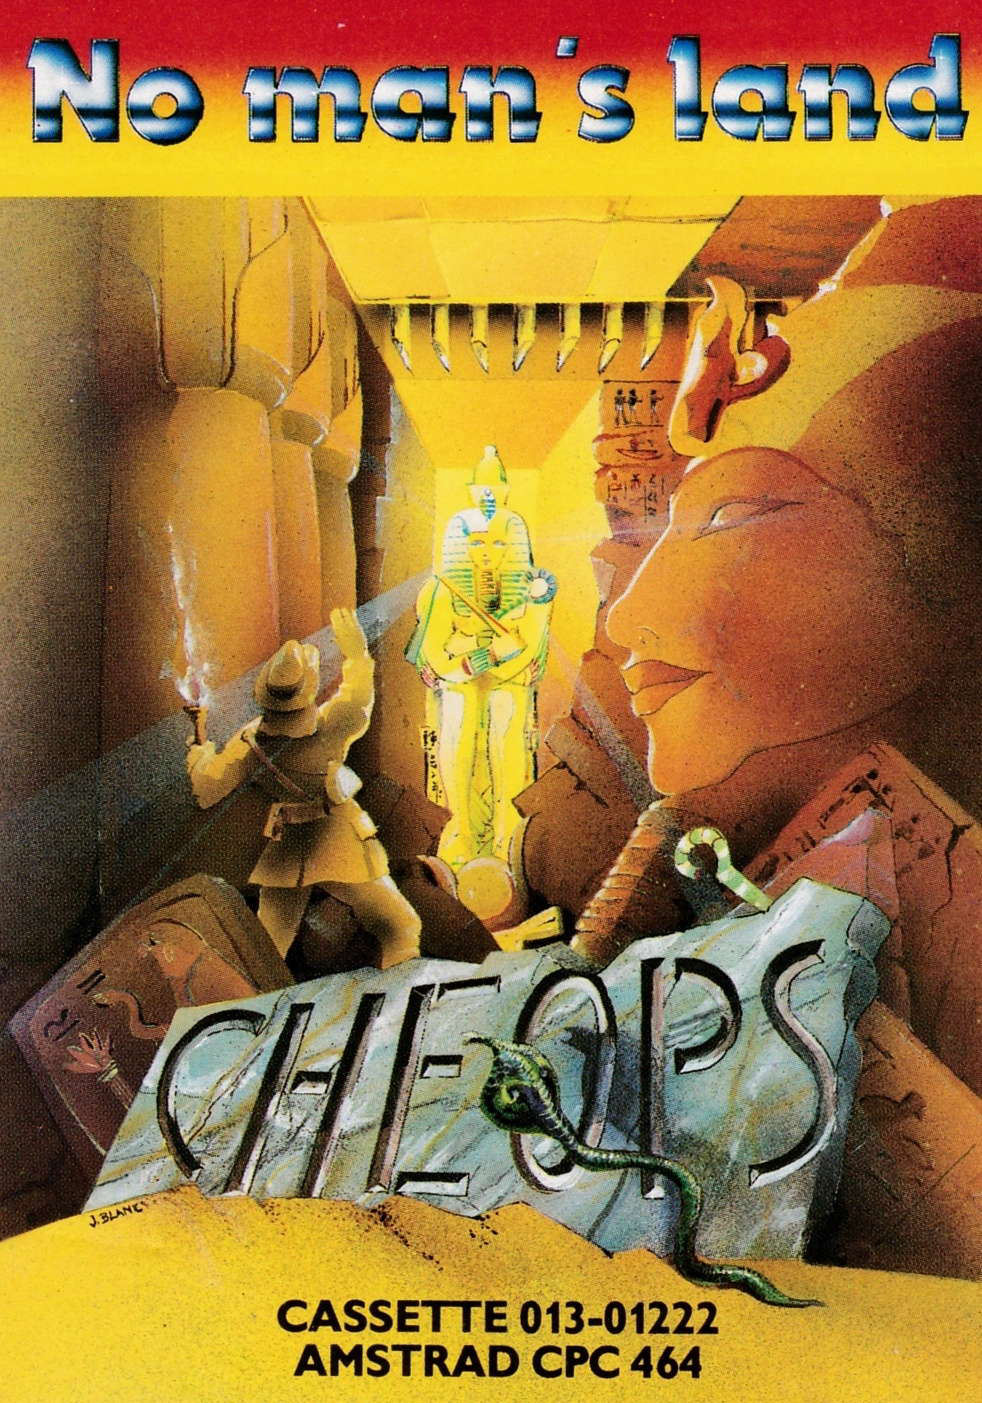 cover of the Amstrad CPC game Cheops  by GameBase CPC